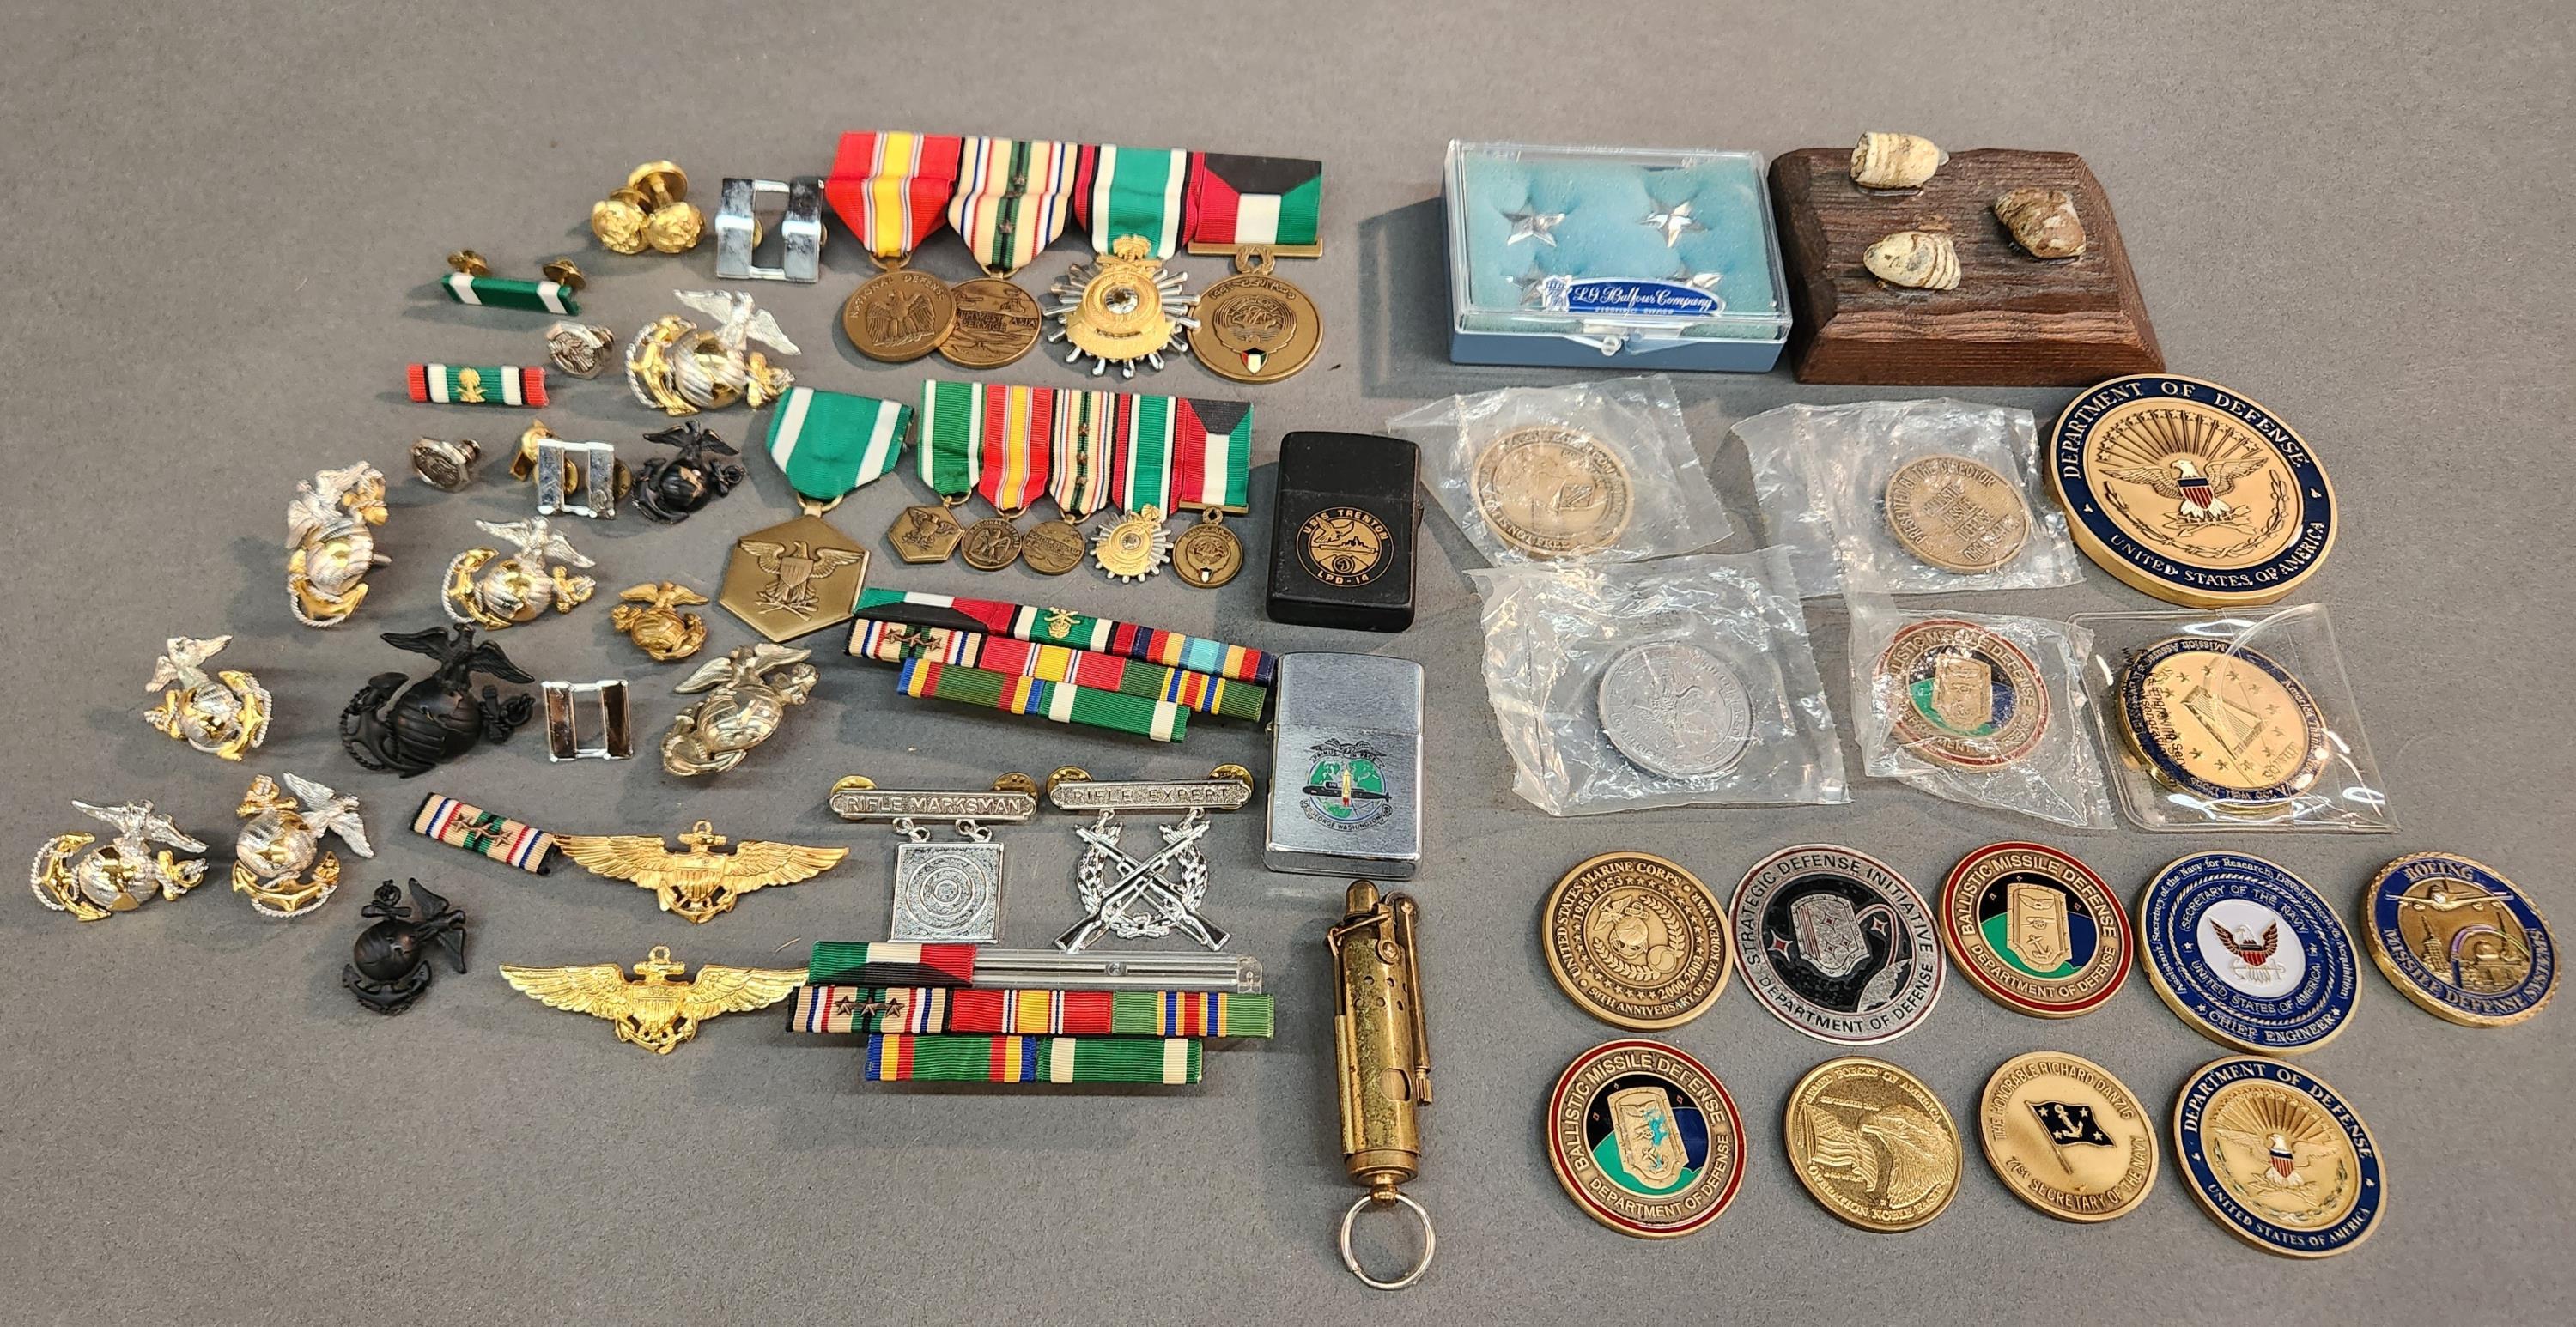 Desert Storm insignia, challenge coins, & others